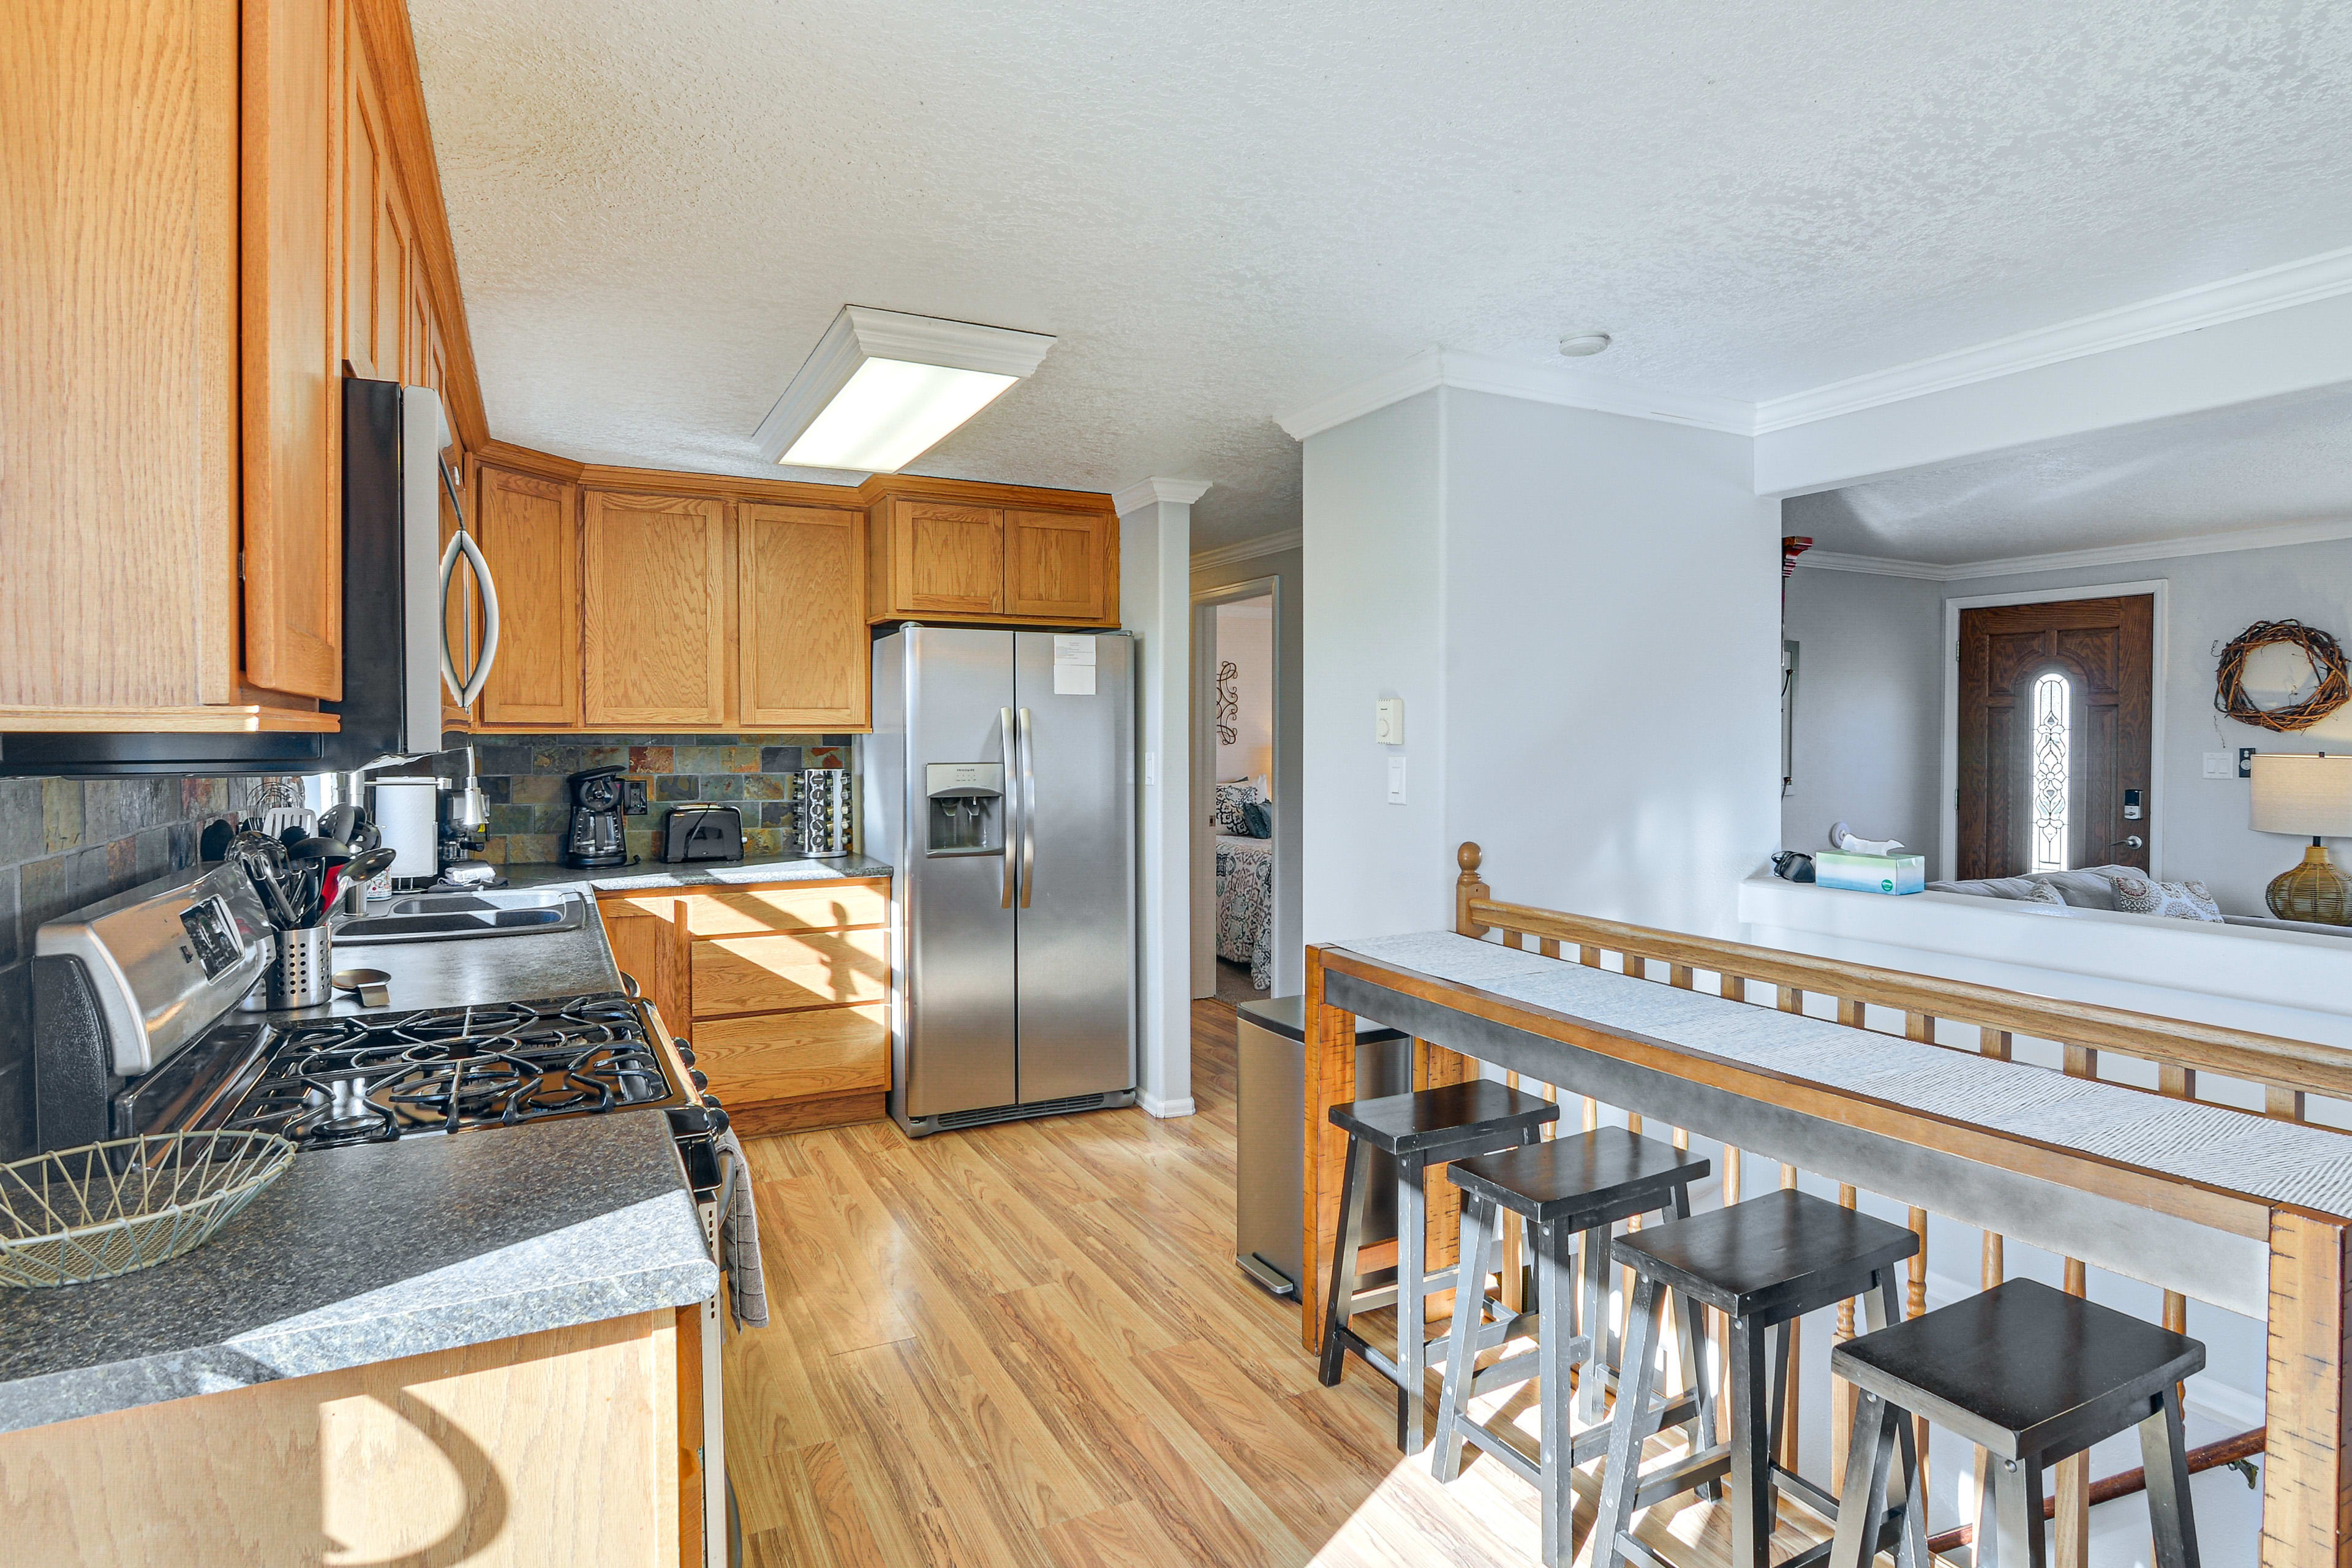 Kitchen | Fully Equipped | Drip Coffee Maker | Main Floor